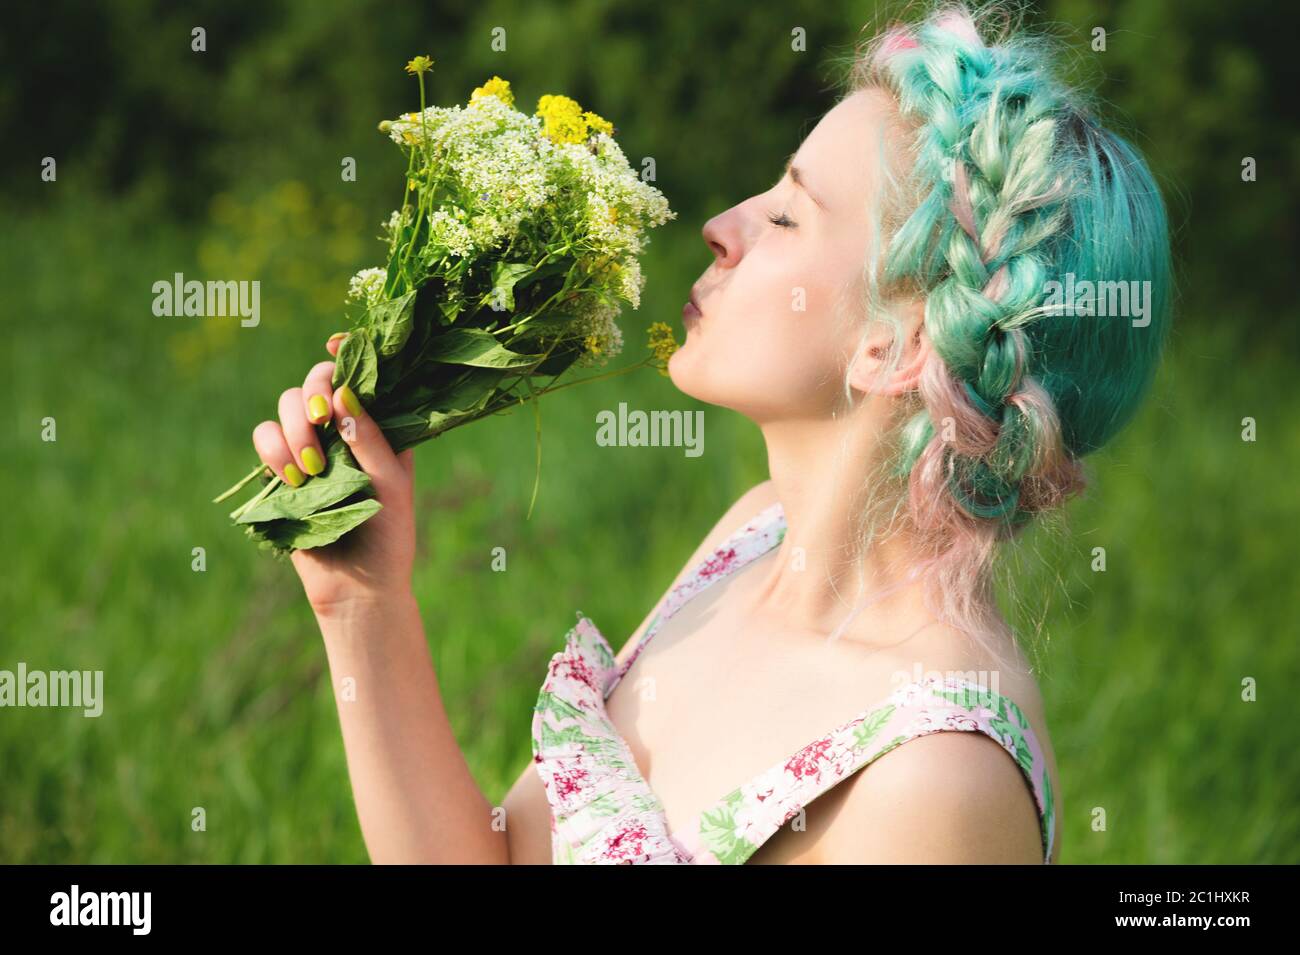 Cute young girl is sniffing a bouquet of field grasses in nature. Harmony and enjoyment in nature Stock Photo